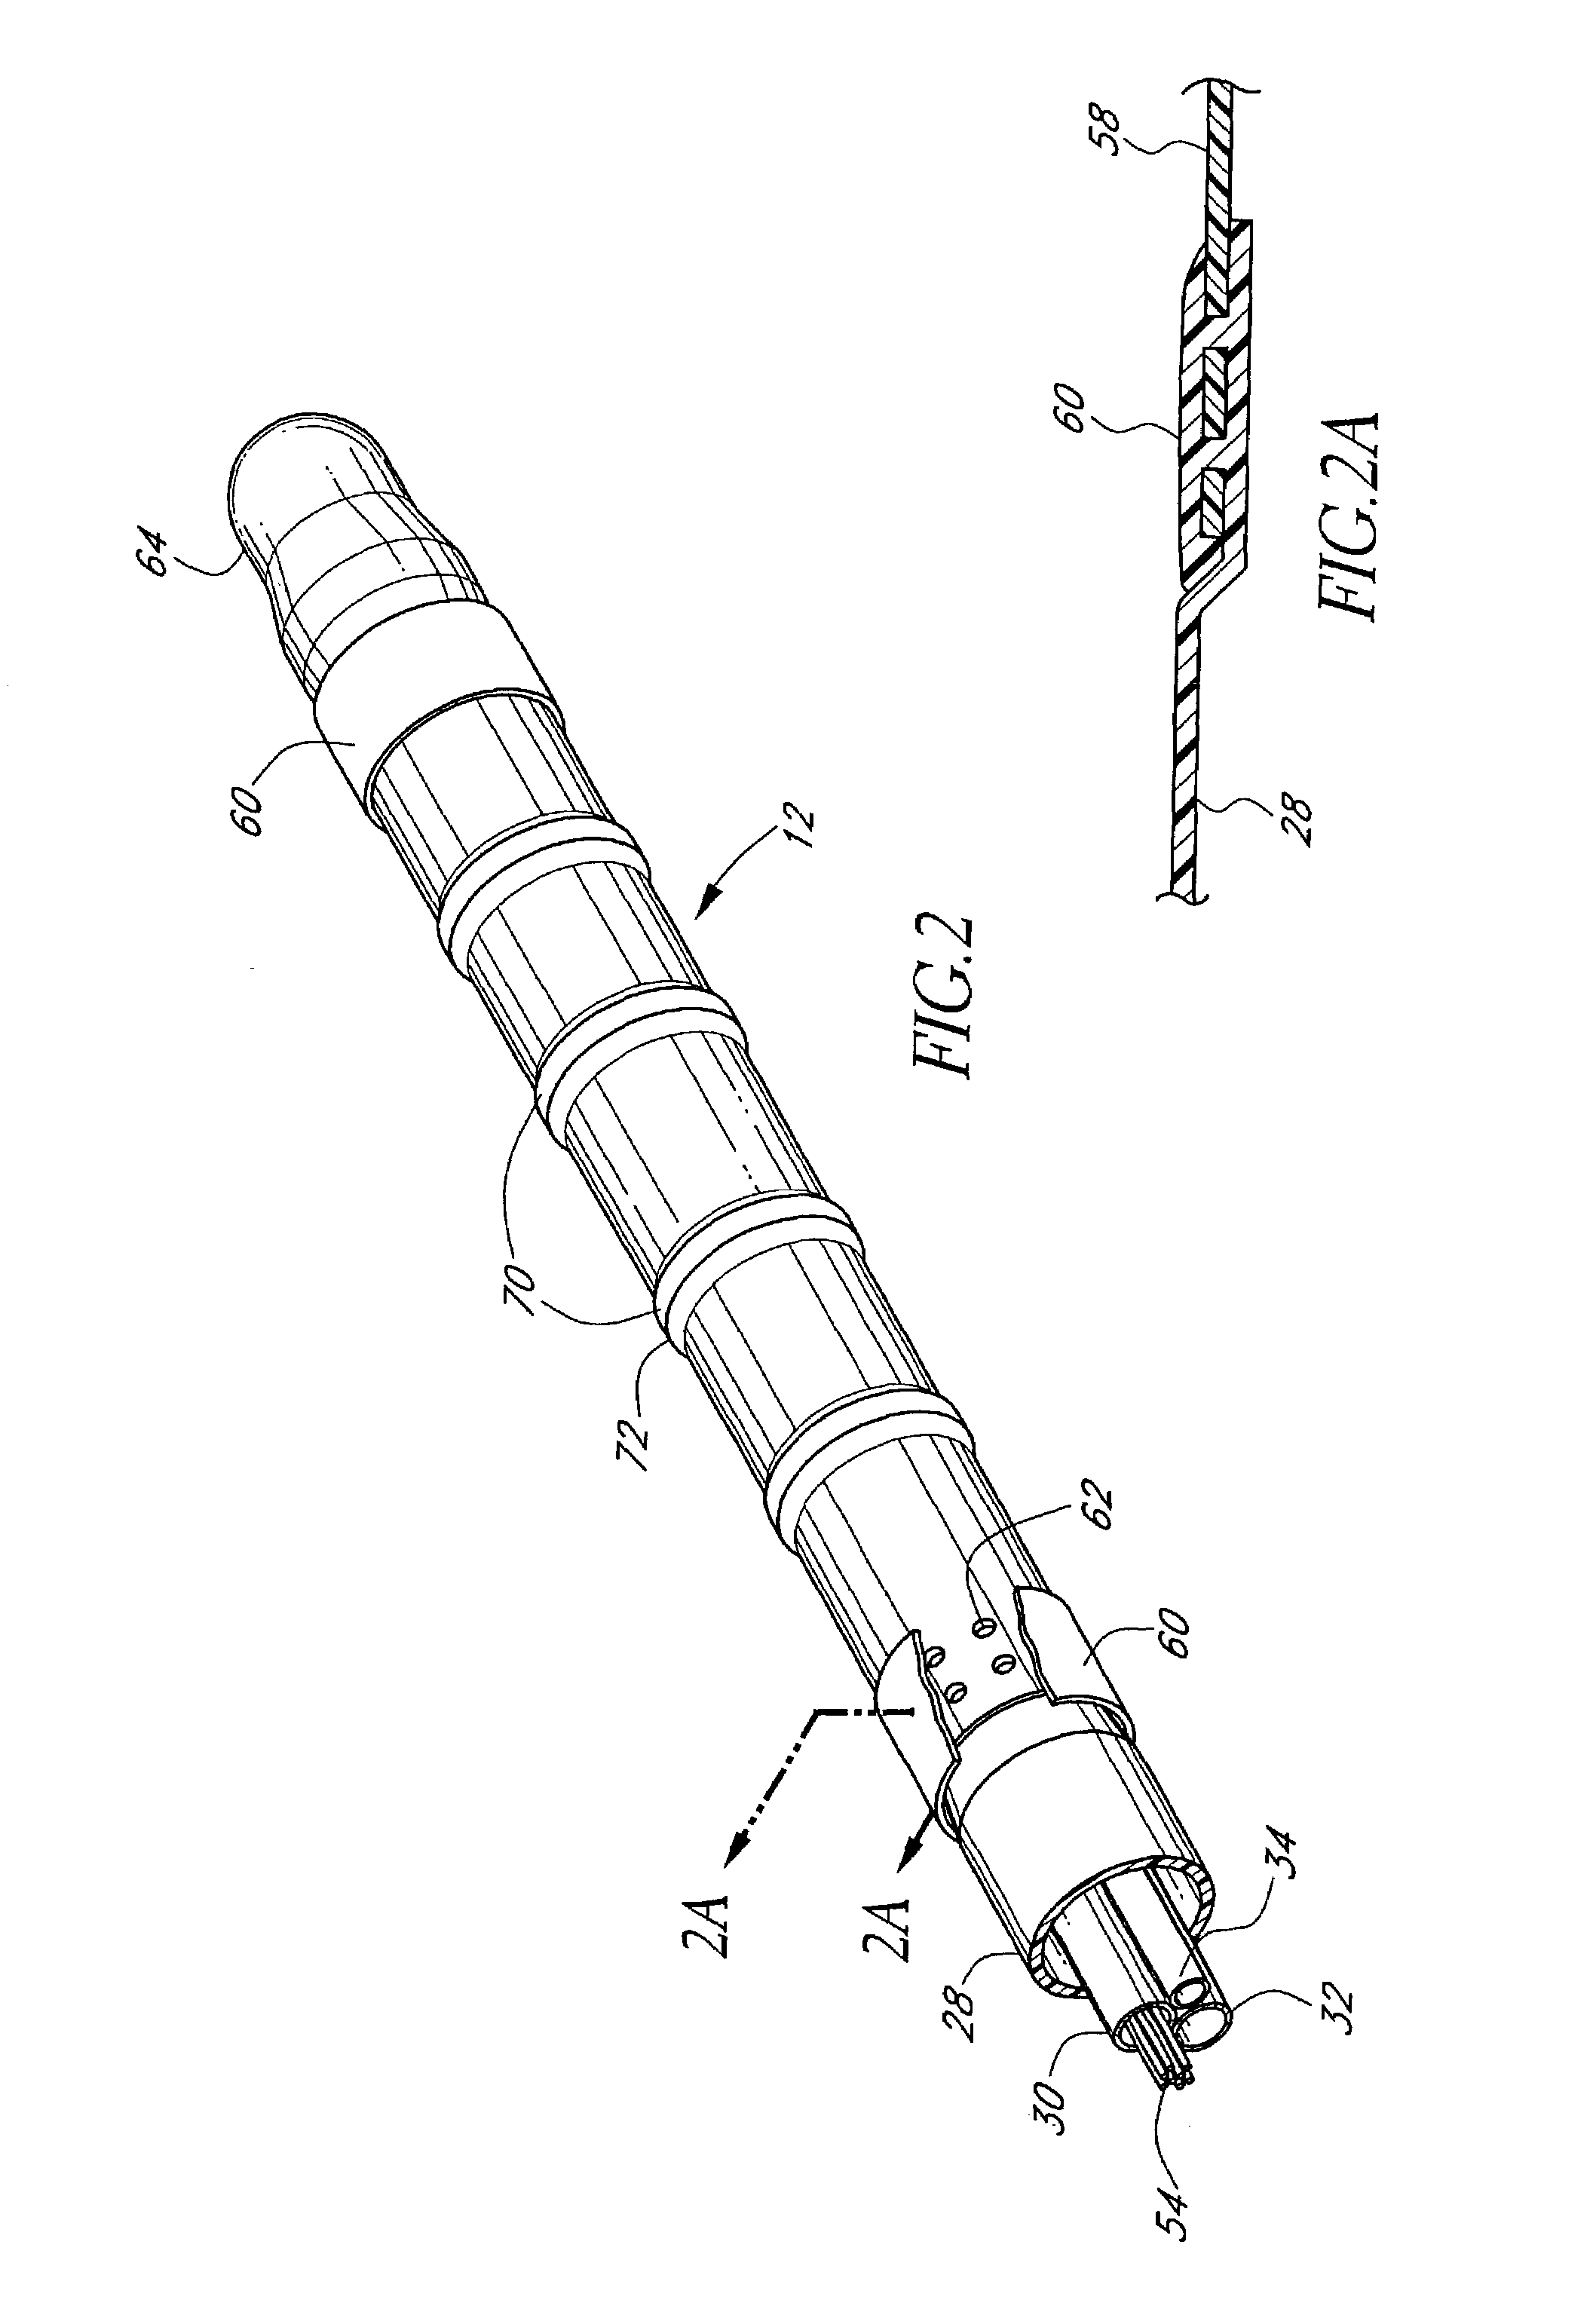 Irrigated ablation device assembly